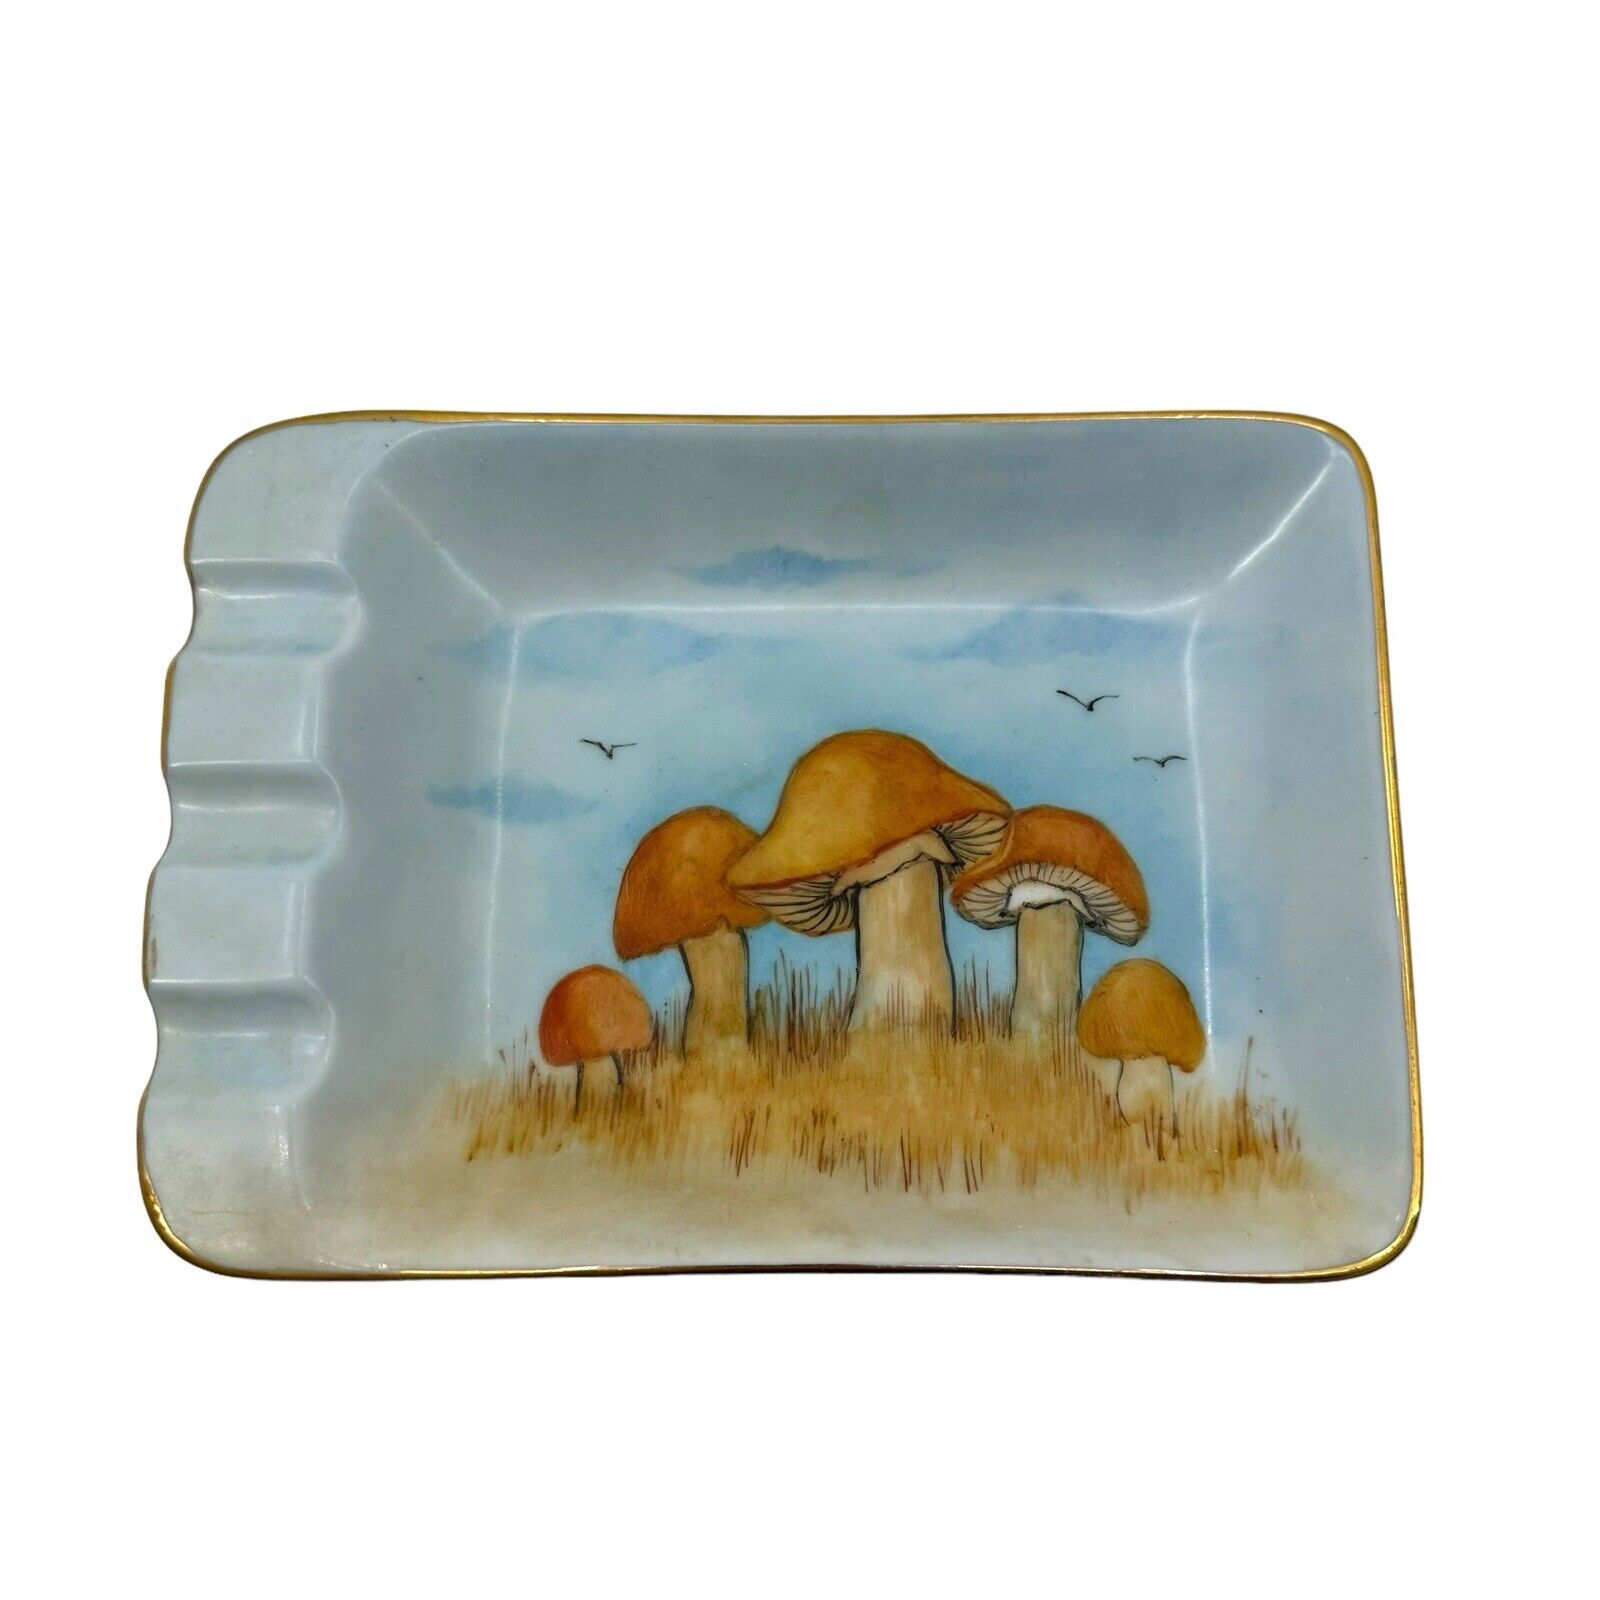 Vintage 1970's Ceramic Ashtray Mushrooms Collectible  Mid Century Modern Painted